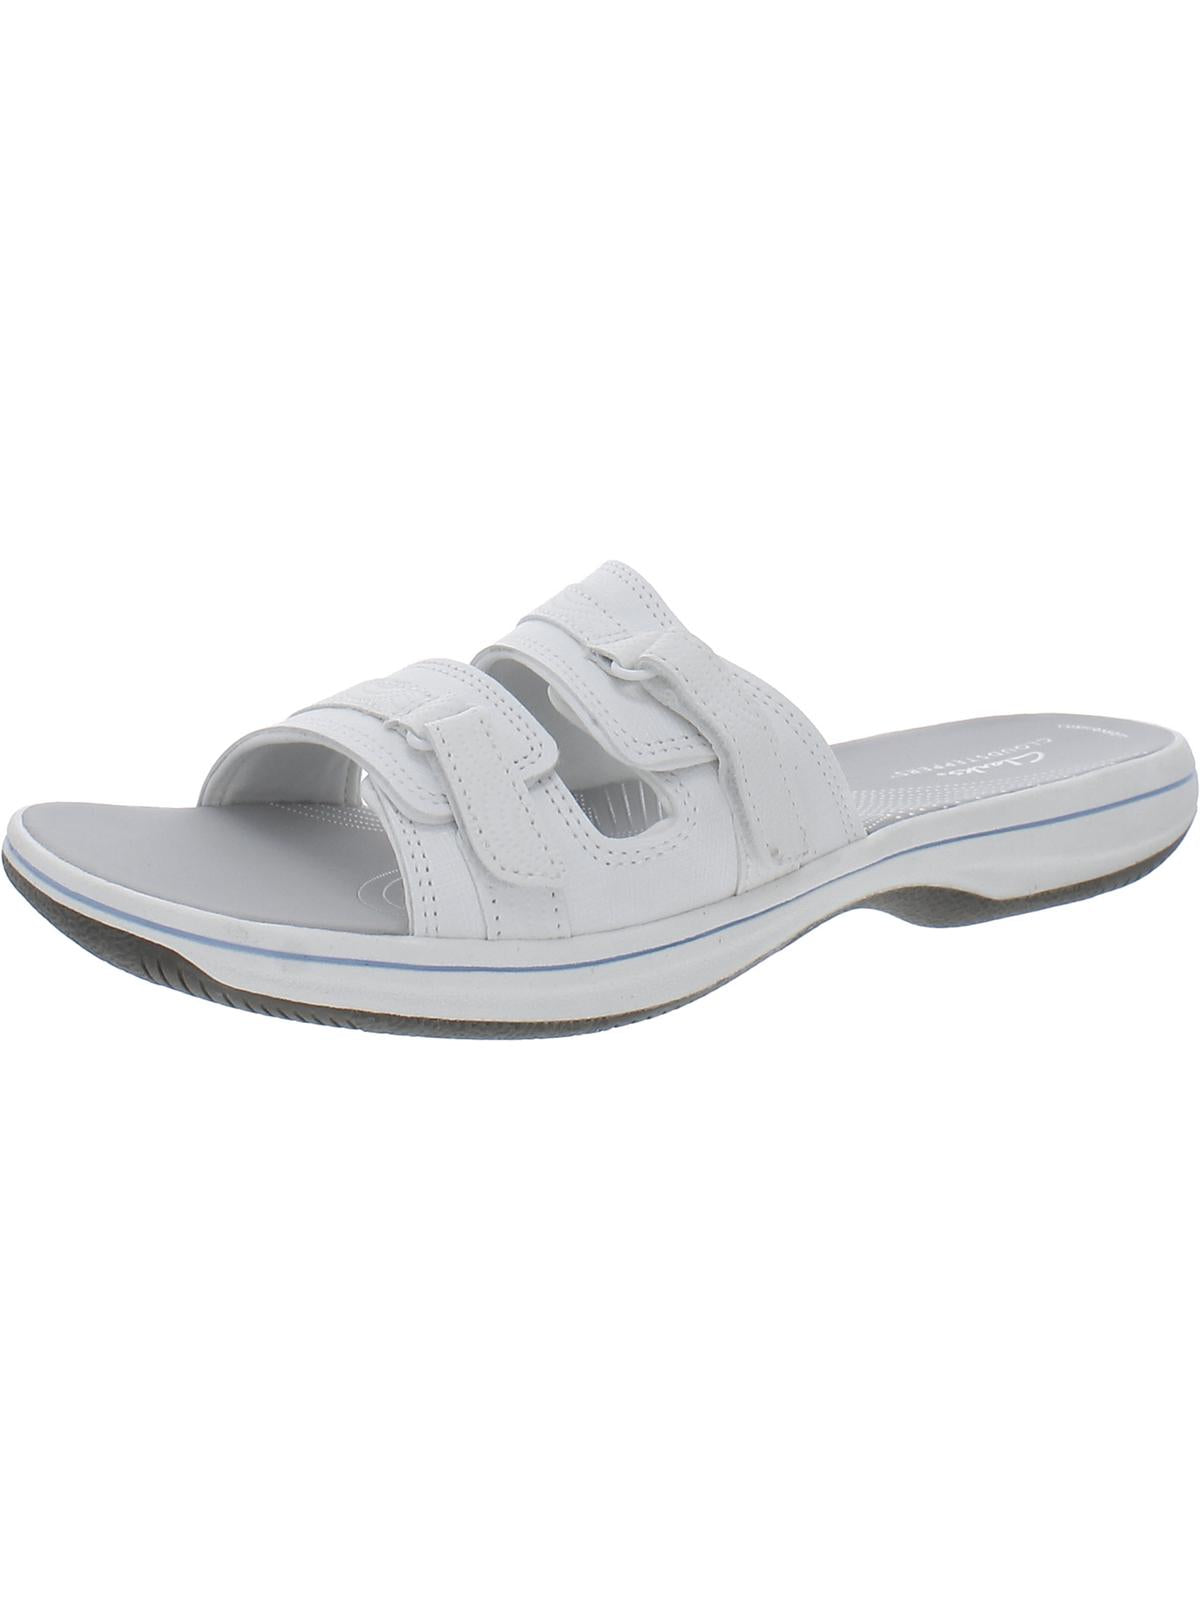 Cloudsteppers By Clarks Breeze Piper Womens Faux Leather Slide Sandals In White